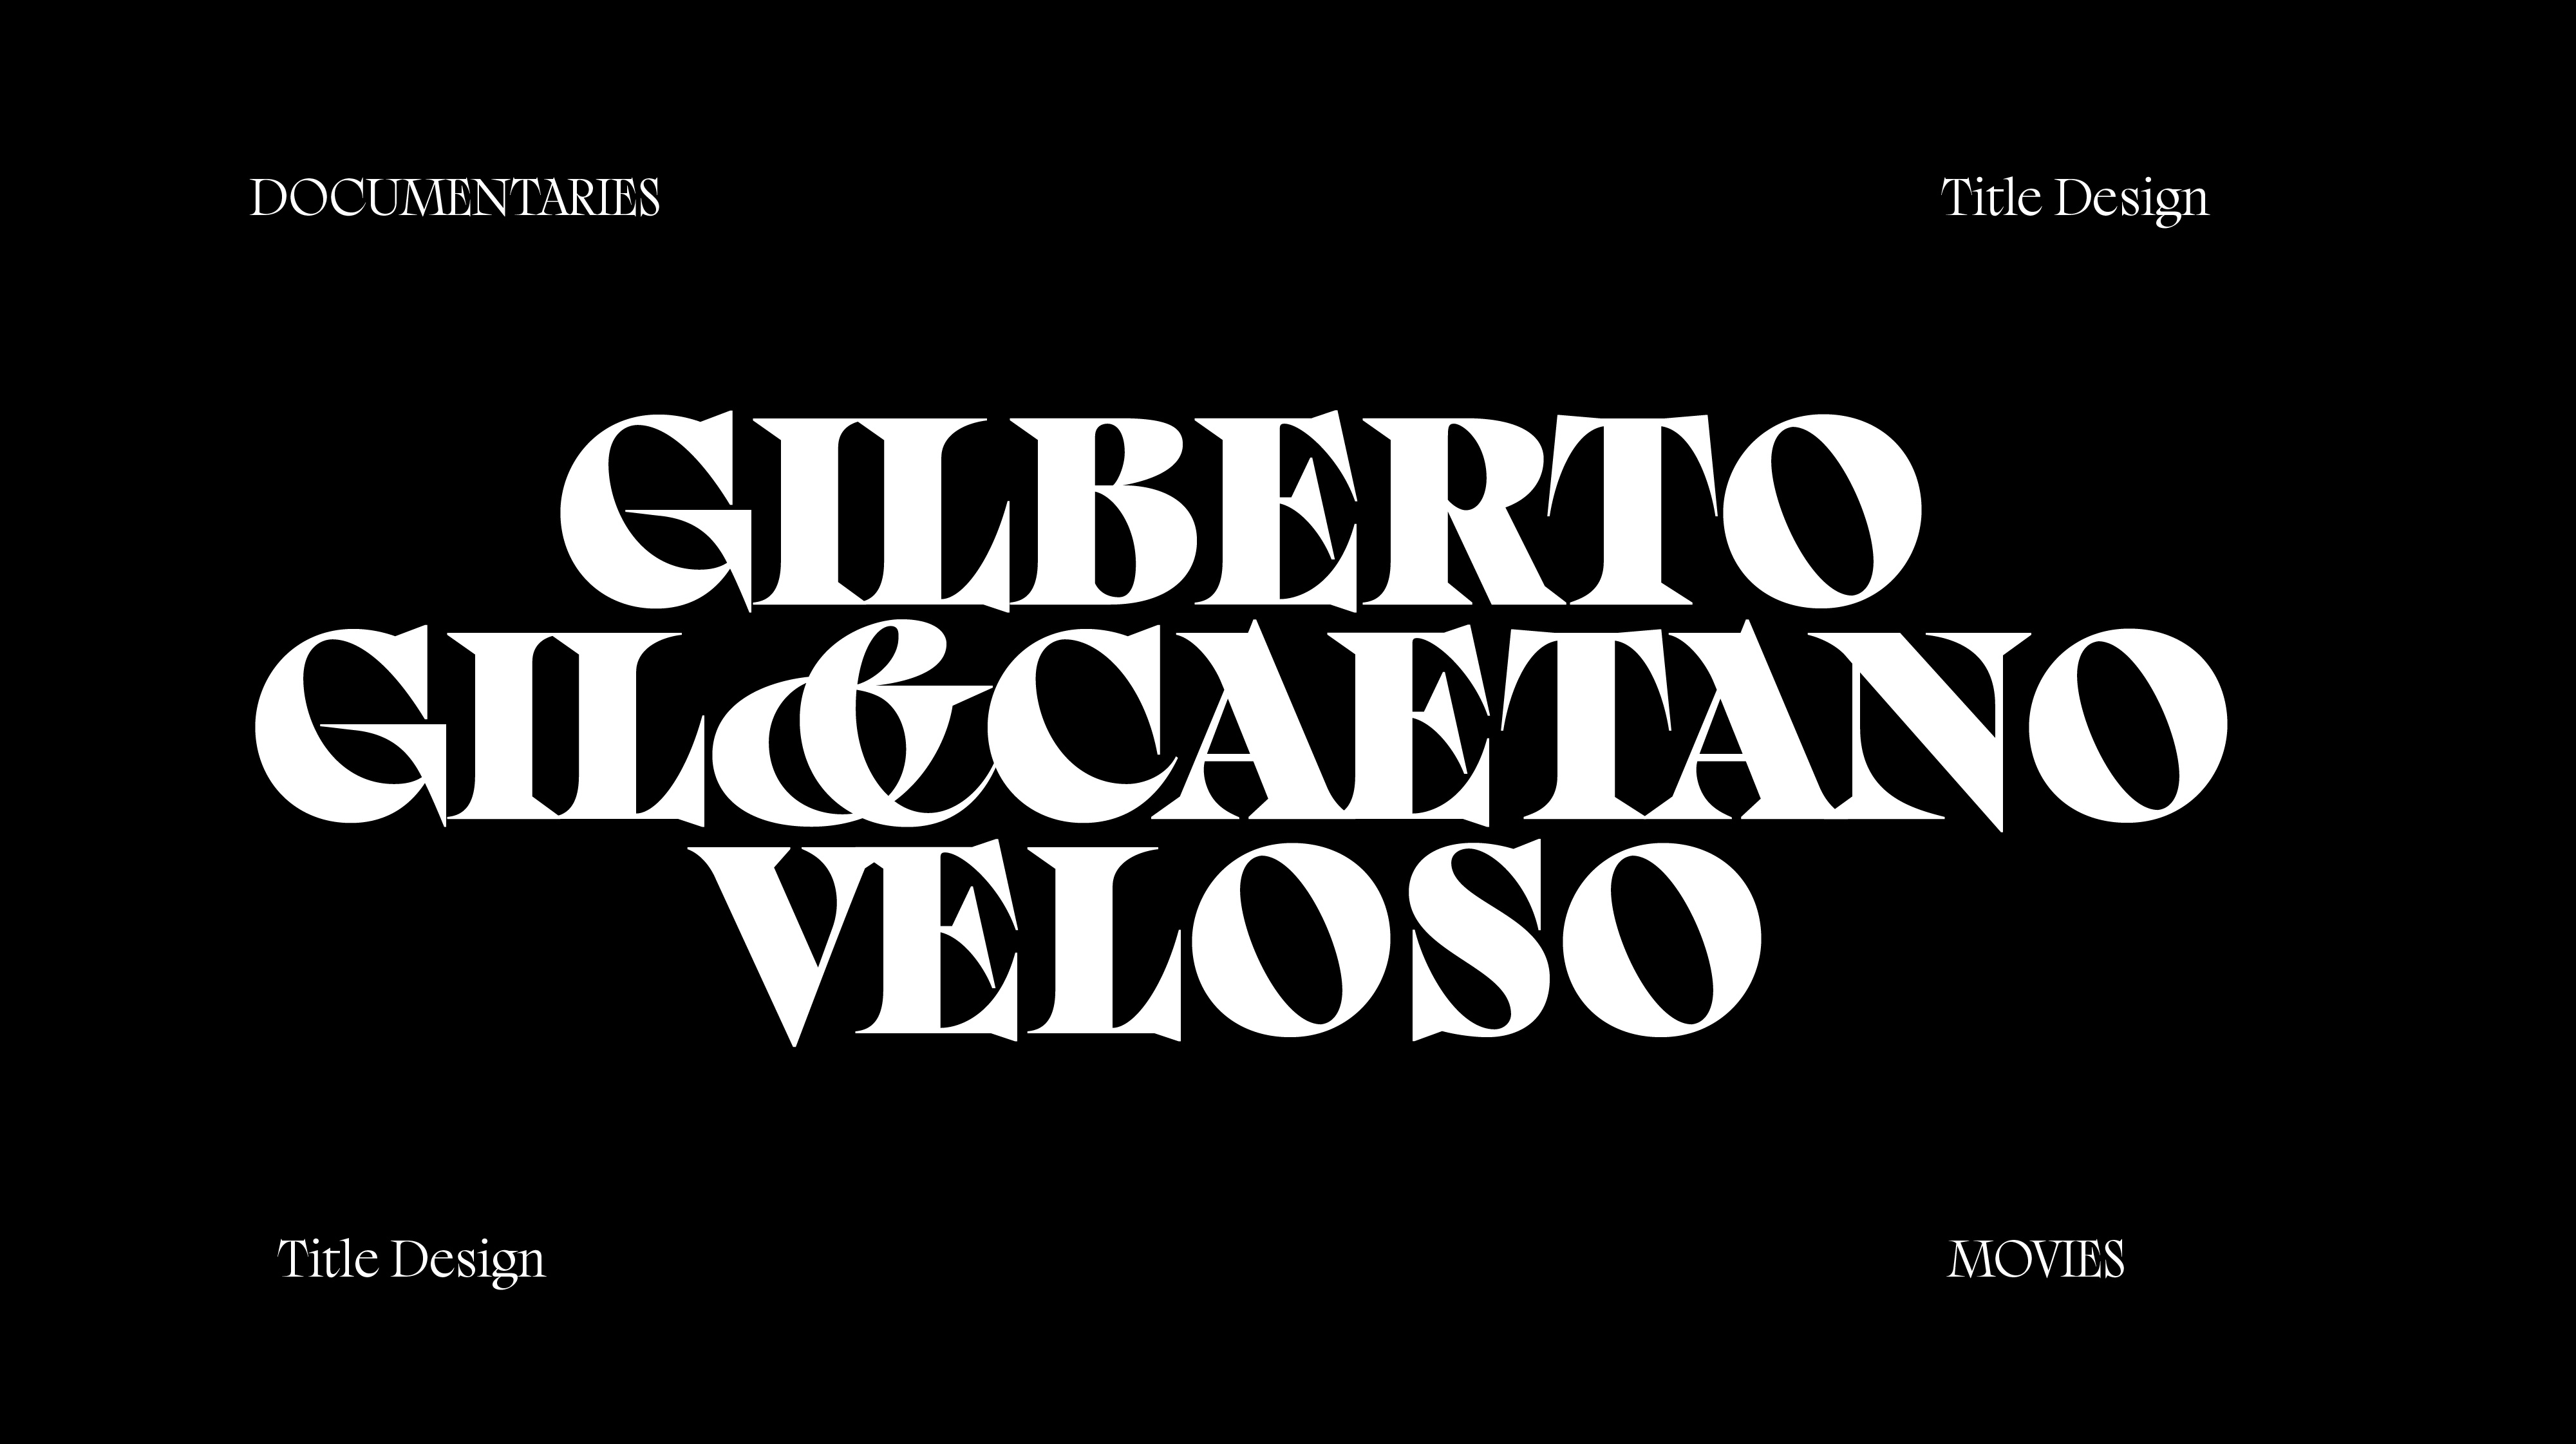 Black Background, White Sprout Display Black saying Gilberto Gil & Caetano Veloso, suggesting usage as Title Design for Videos